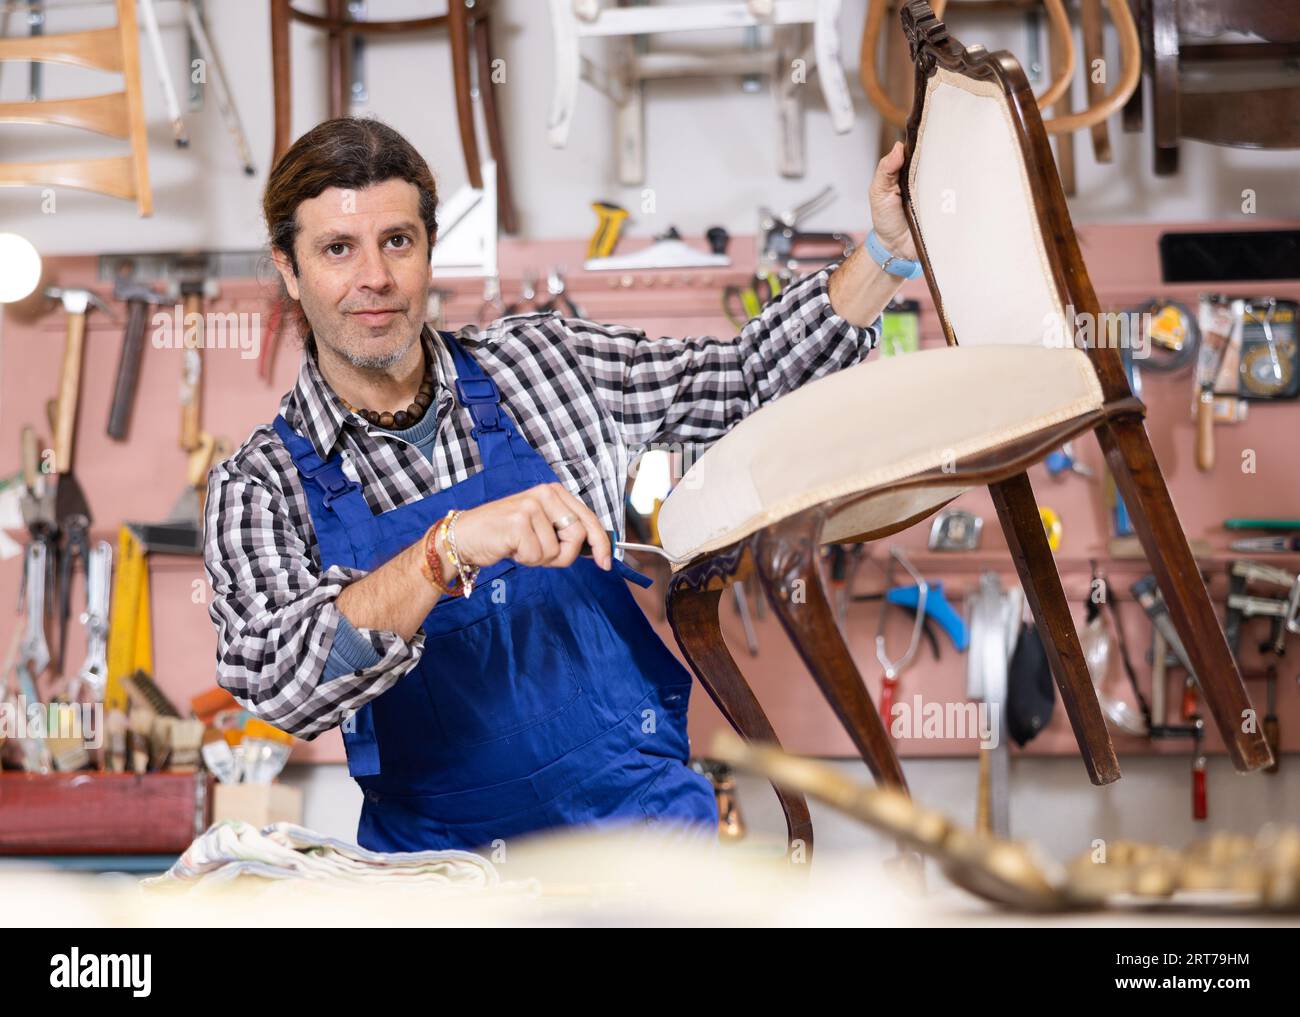 Middle-aged male restorer removes old cloth seat covering from antique wooden chair. Stock Photo